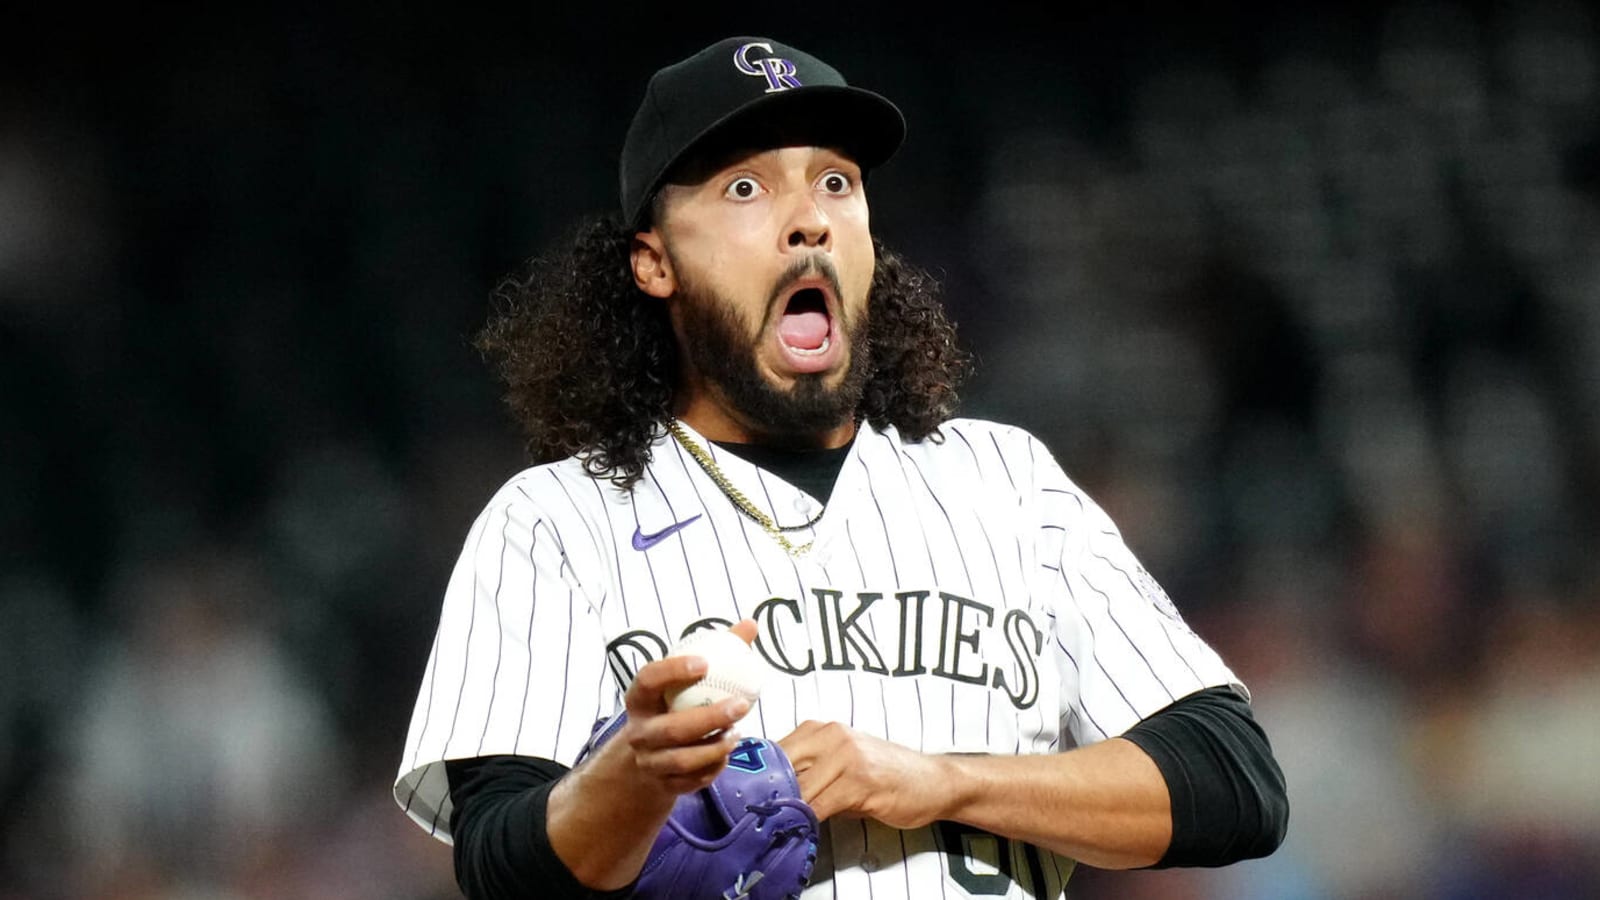 Yet another Rockies pitcher dealing with injury